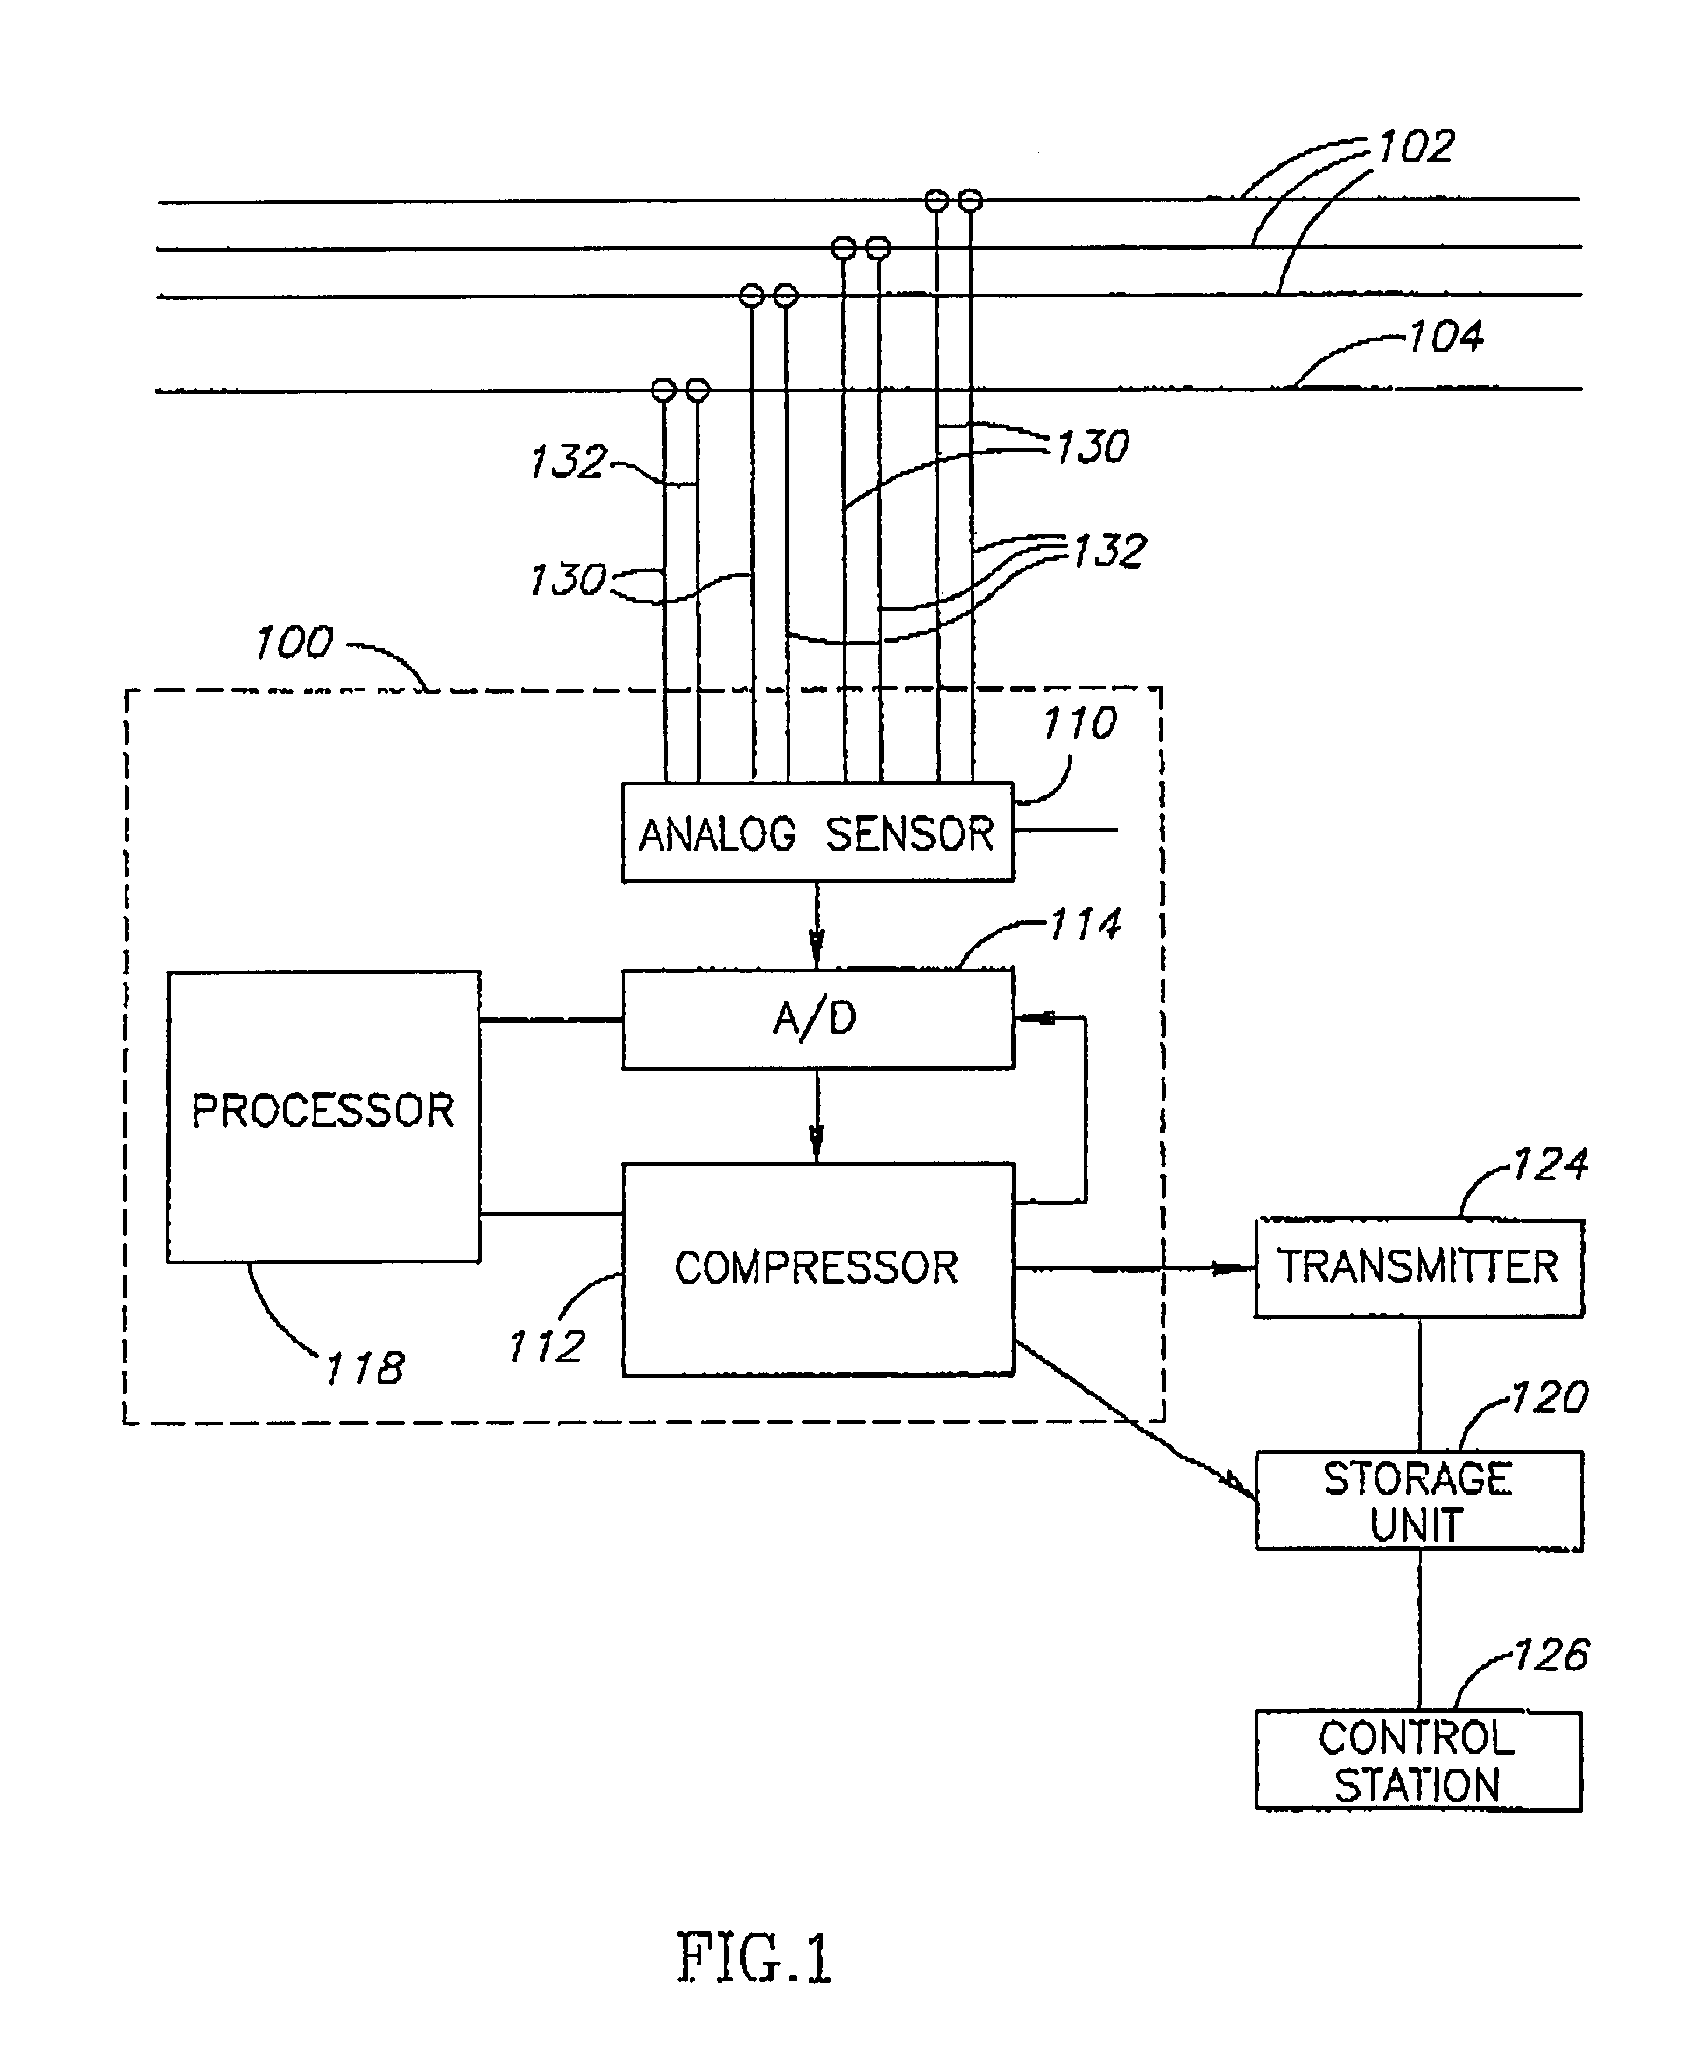 Method of compressing values of a monitored electrical power signal